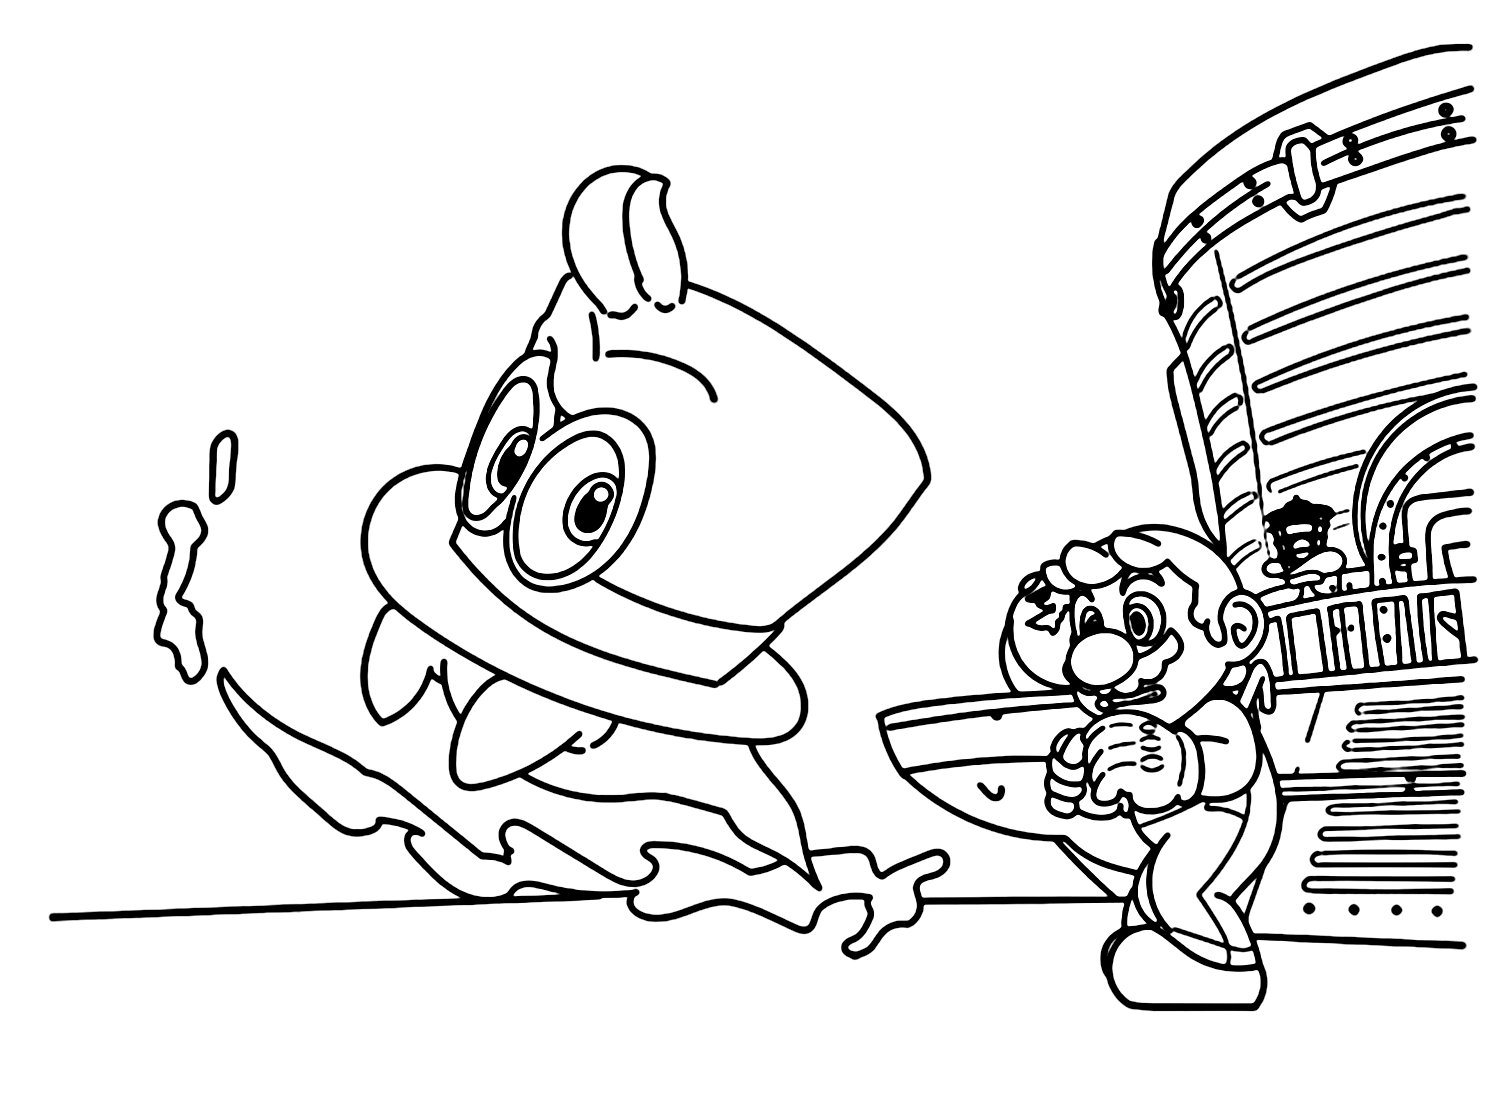 Mario and Cappy Coloring Page